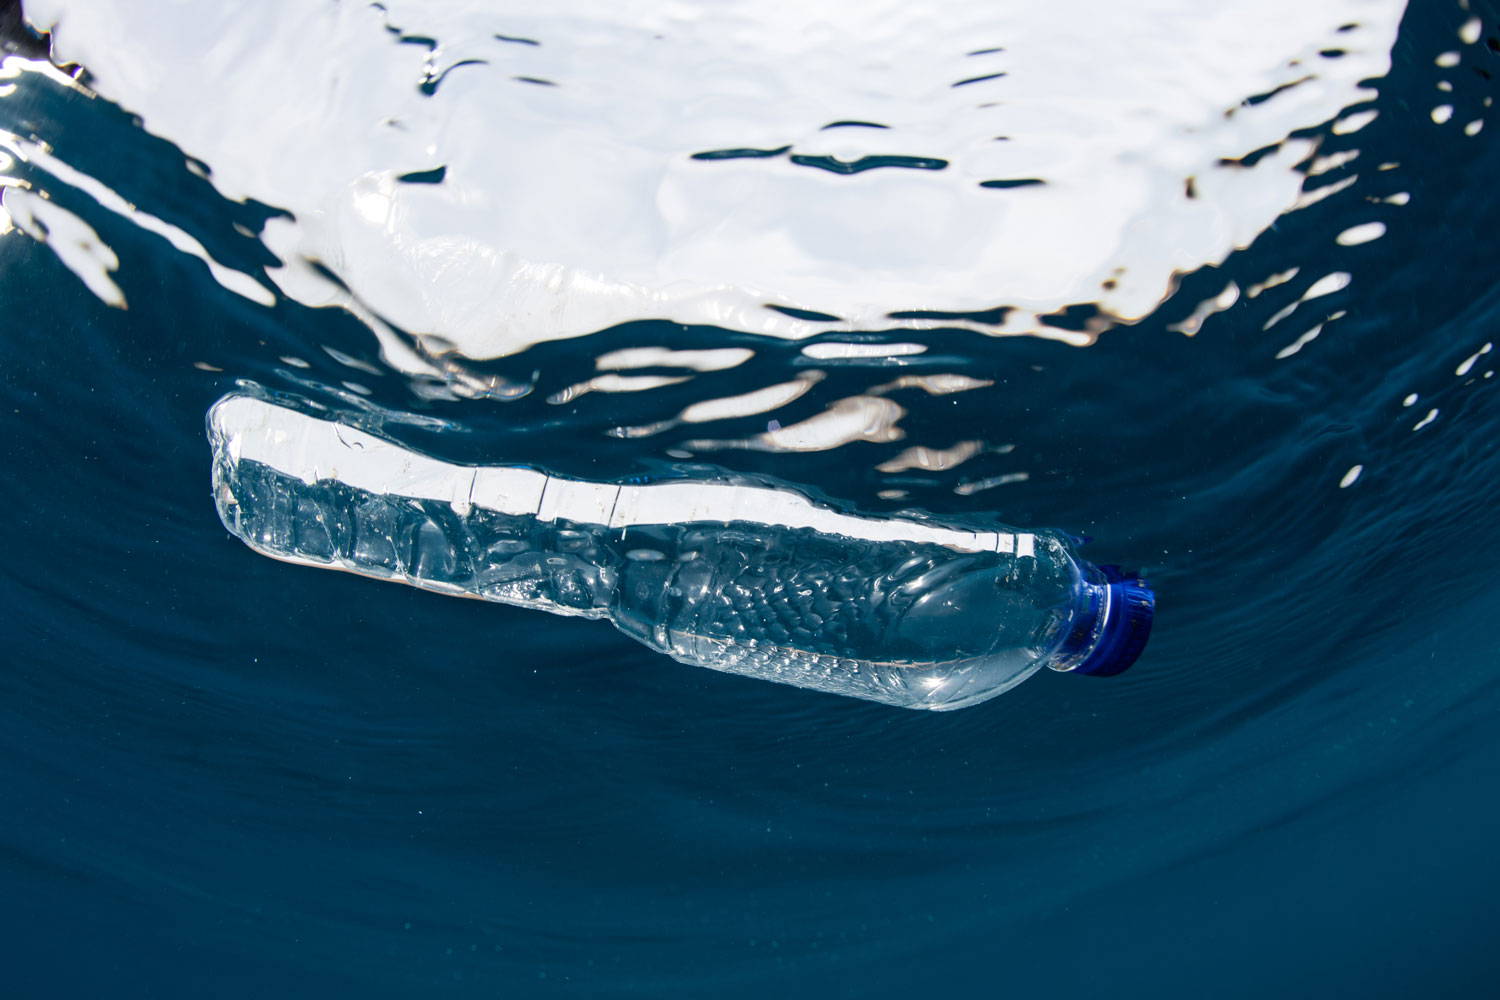 Shops sold 2.5 BILLION bottles of water in 2019 as tide of plastic shows no  sign of slowing down